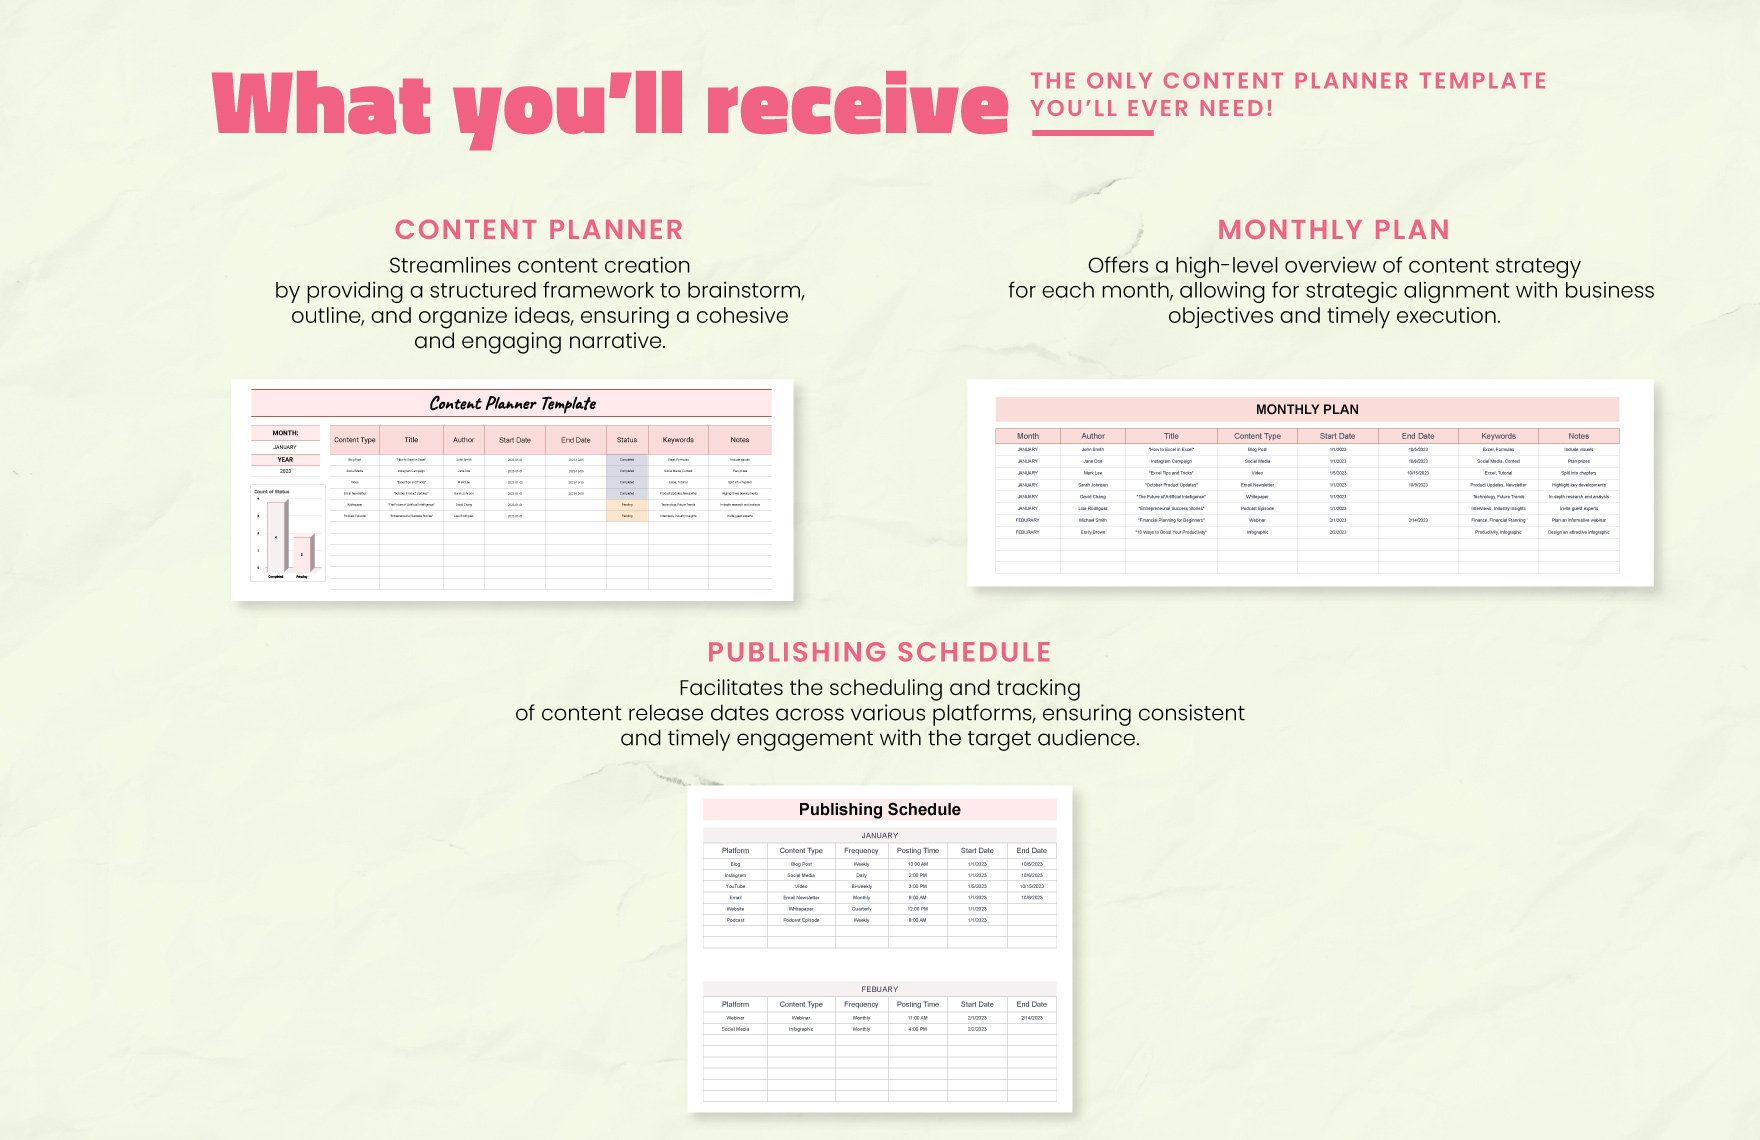 Content Planner Template